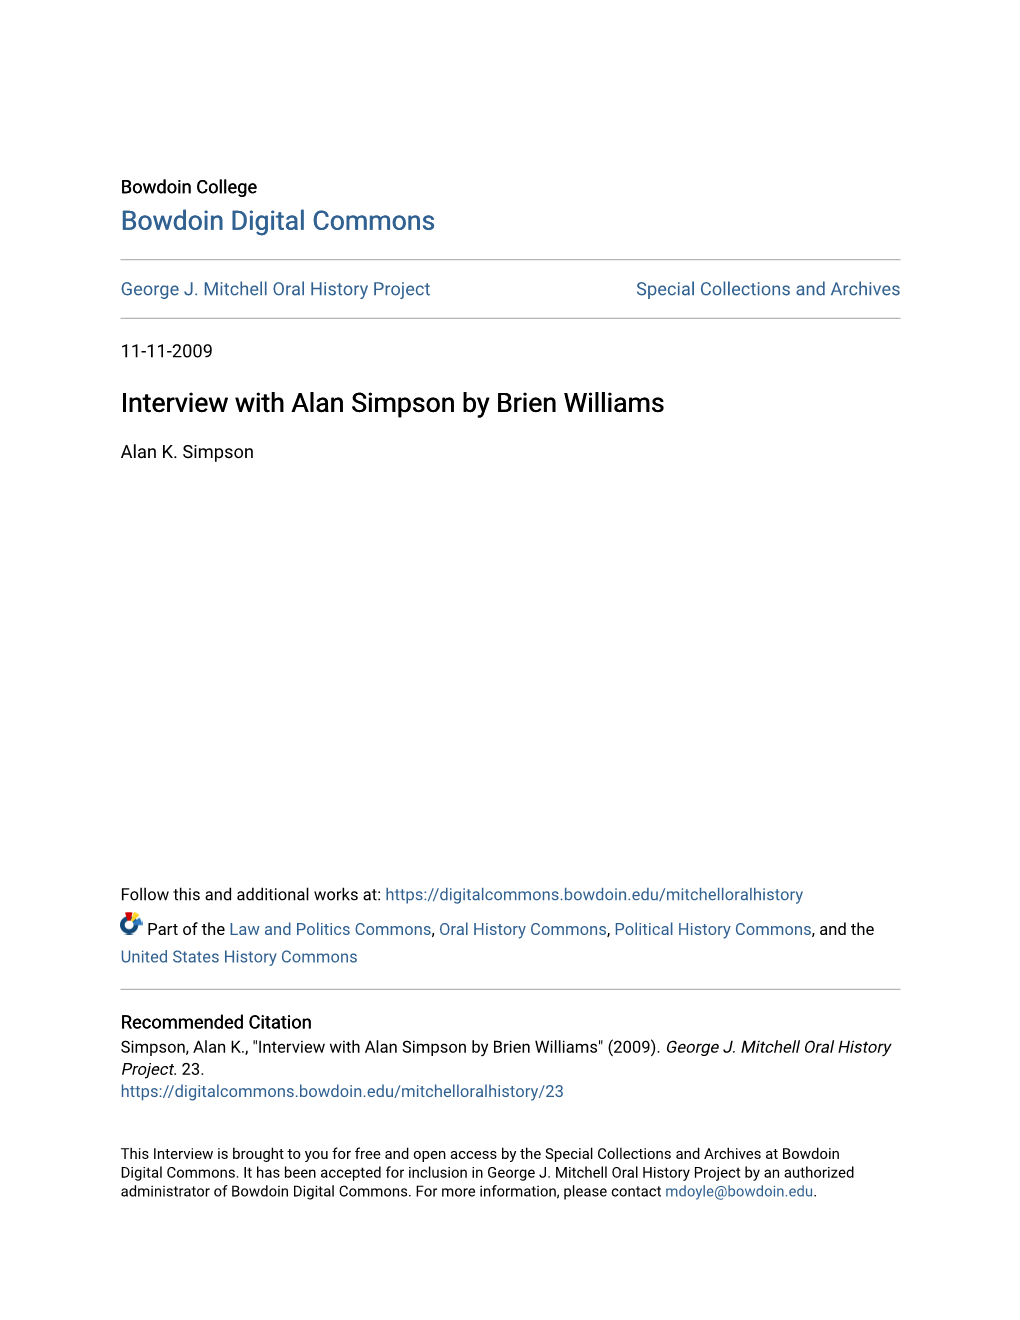 Interview with Alan Simpson by Brien Williams